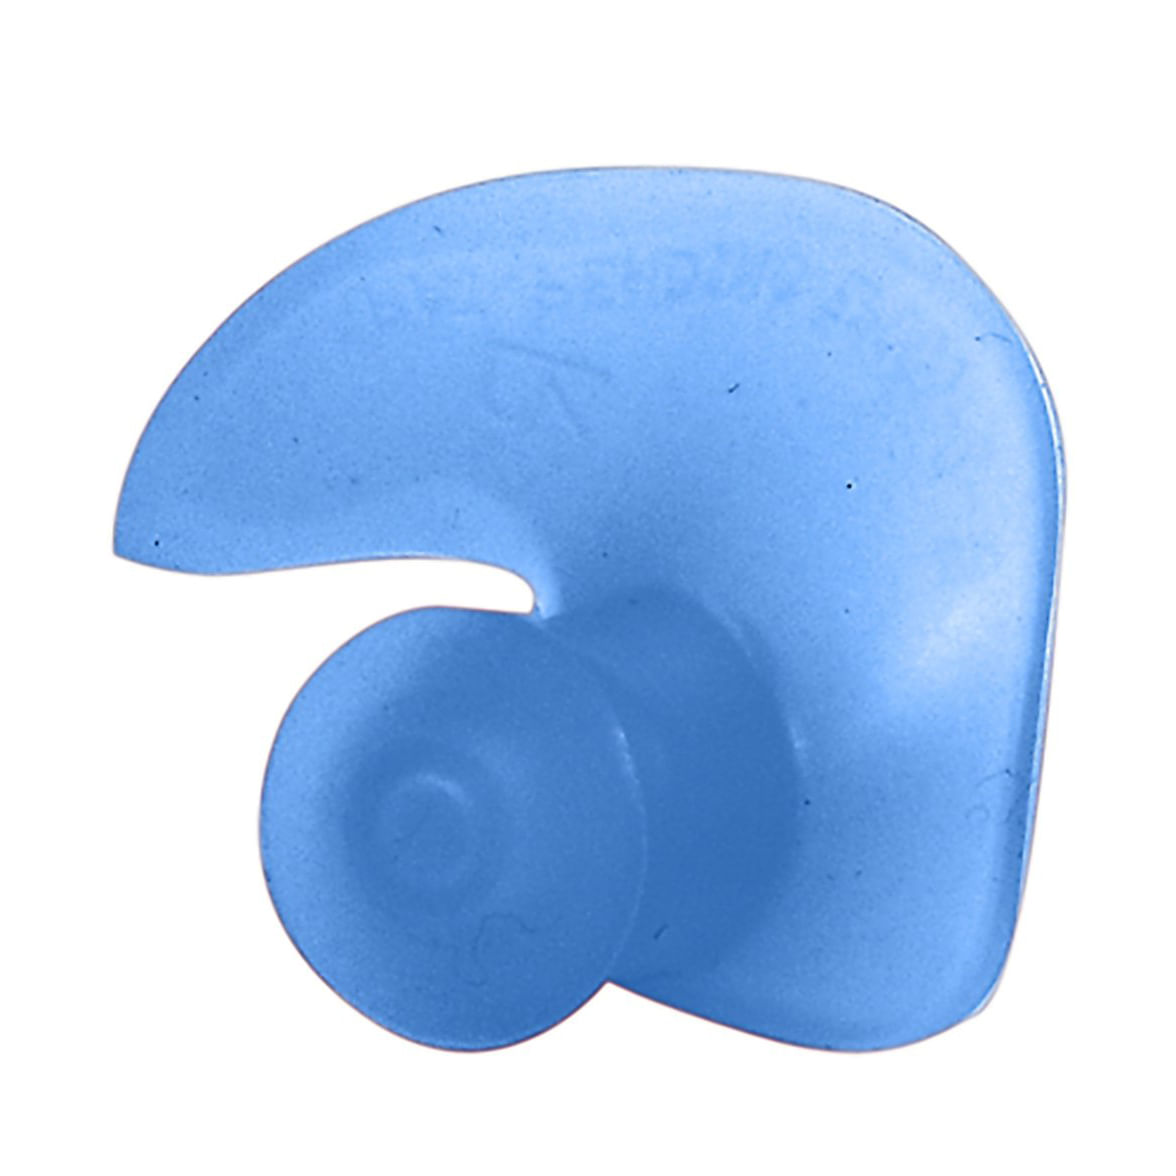 TYR Silicone Molded Ear Plugs For Swim Clear/Blue 